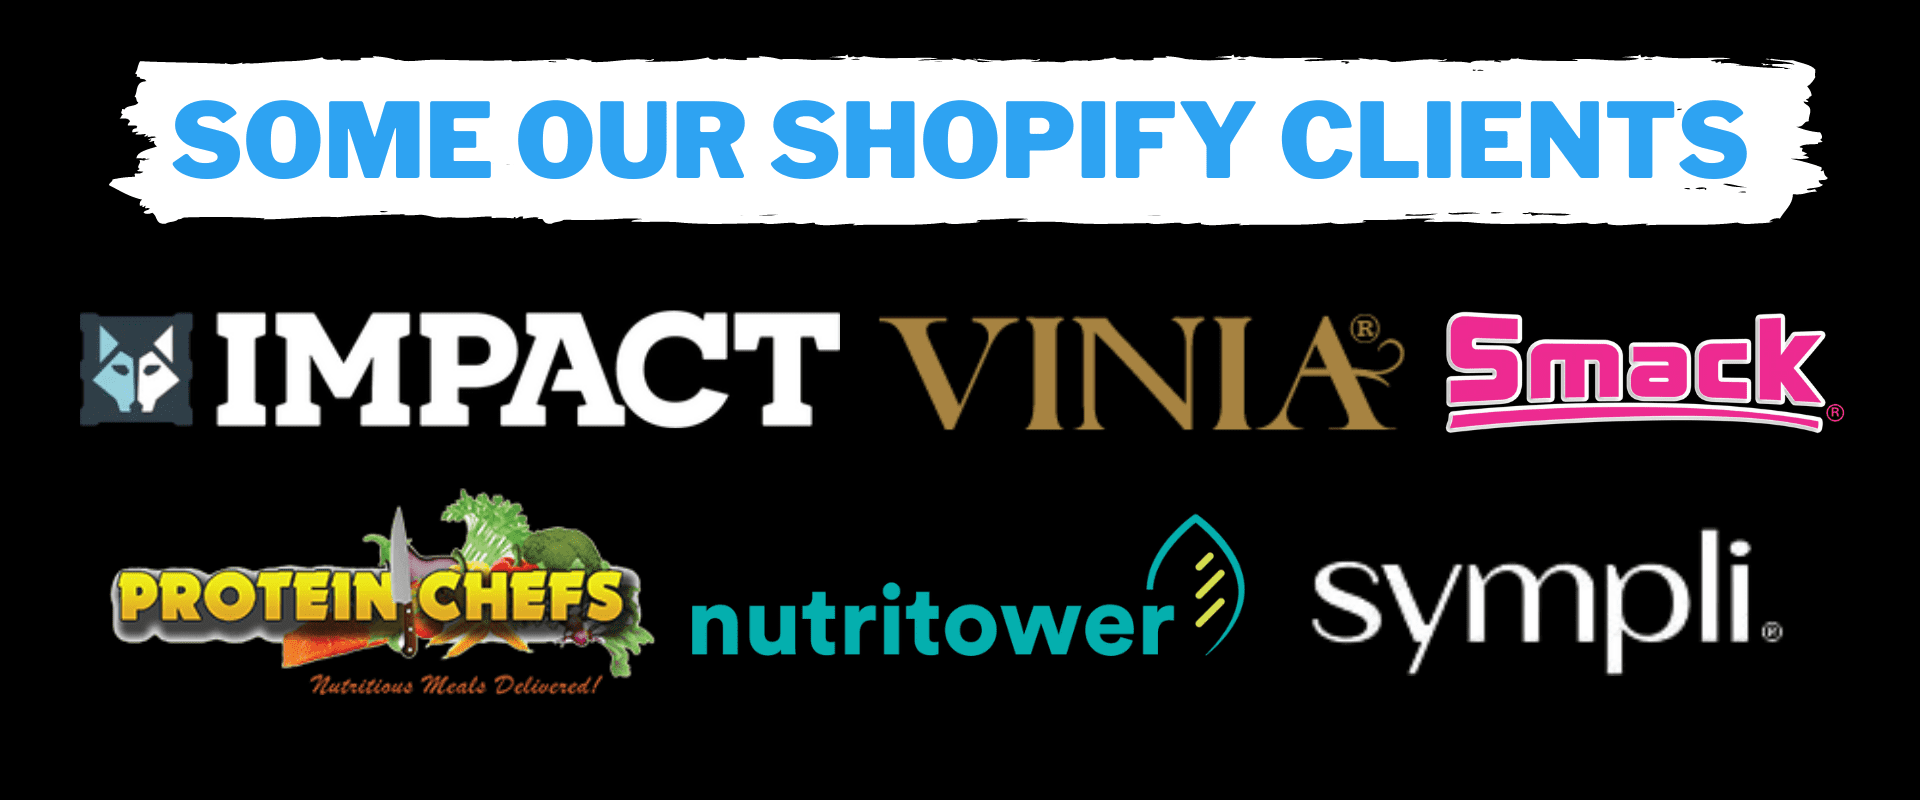 Shopify Experts Agency Impact Dog Crates Vinia Smack Protein Chefs Nutrirtower Sympli